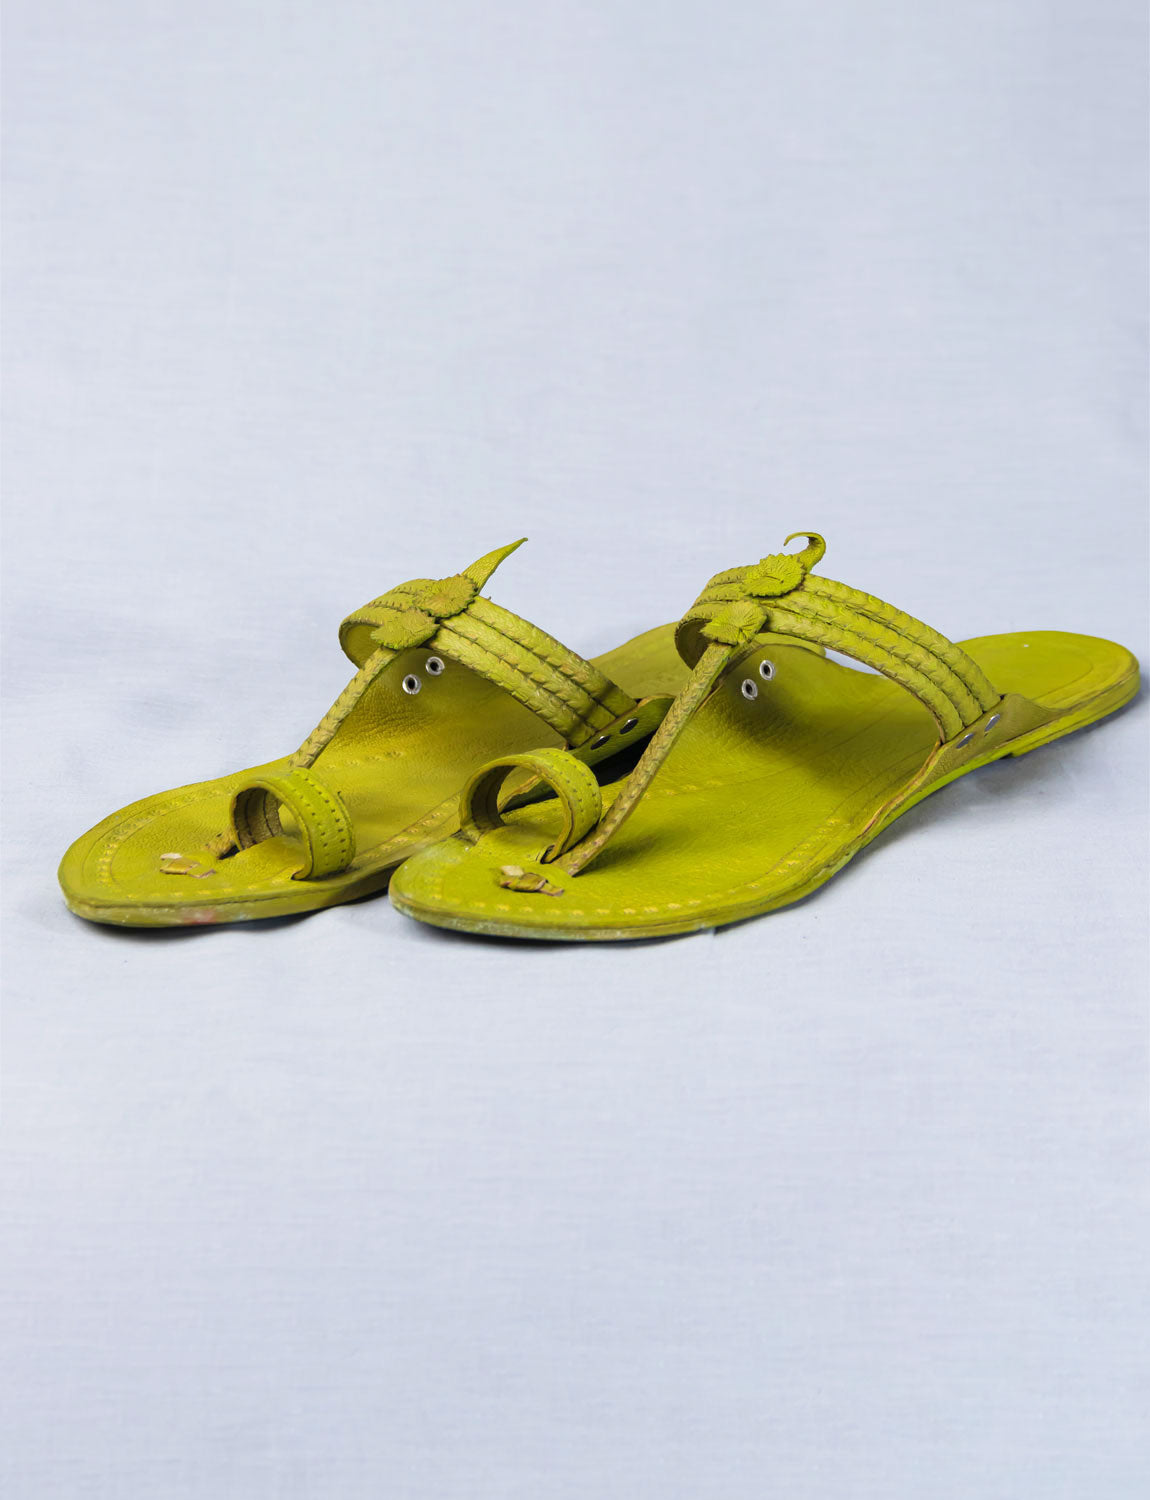 Braided Beauty: Kolhapuri Chappals with Floral Die Punch